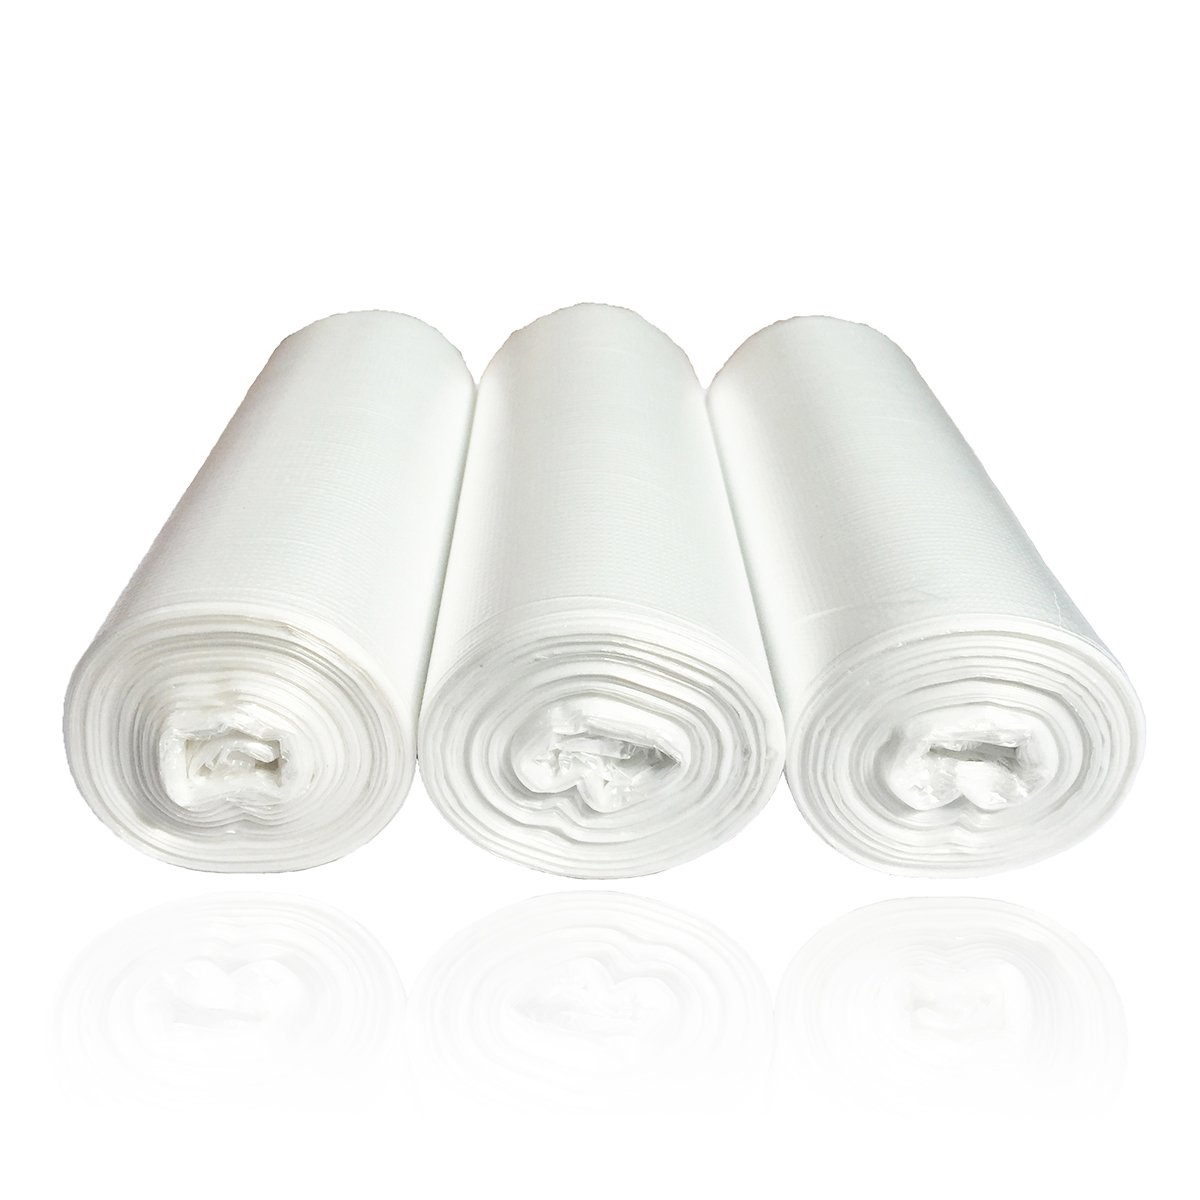 2 Gallon Small Trash Bags, Clear, 150 Counts/ 3 Rolls 50 Count (Pack of 3)